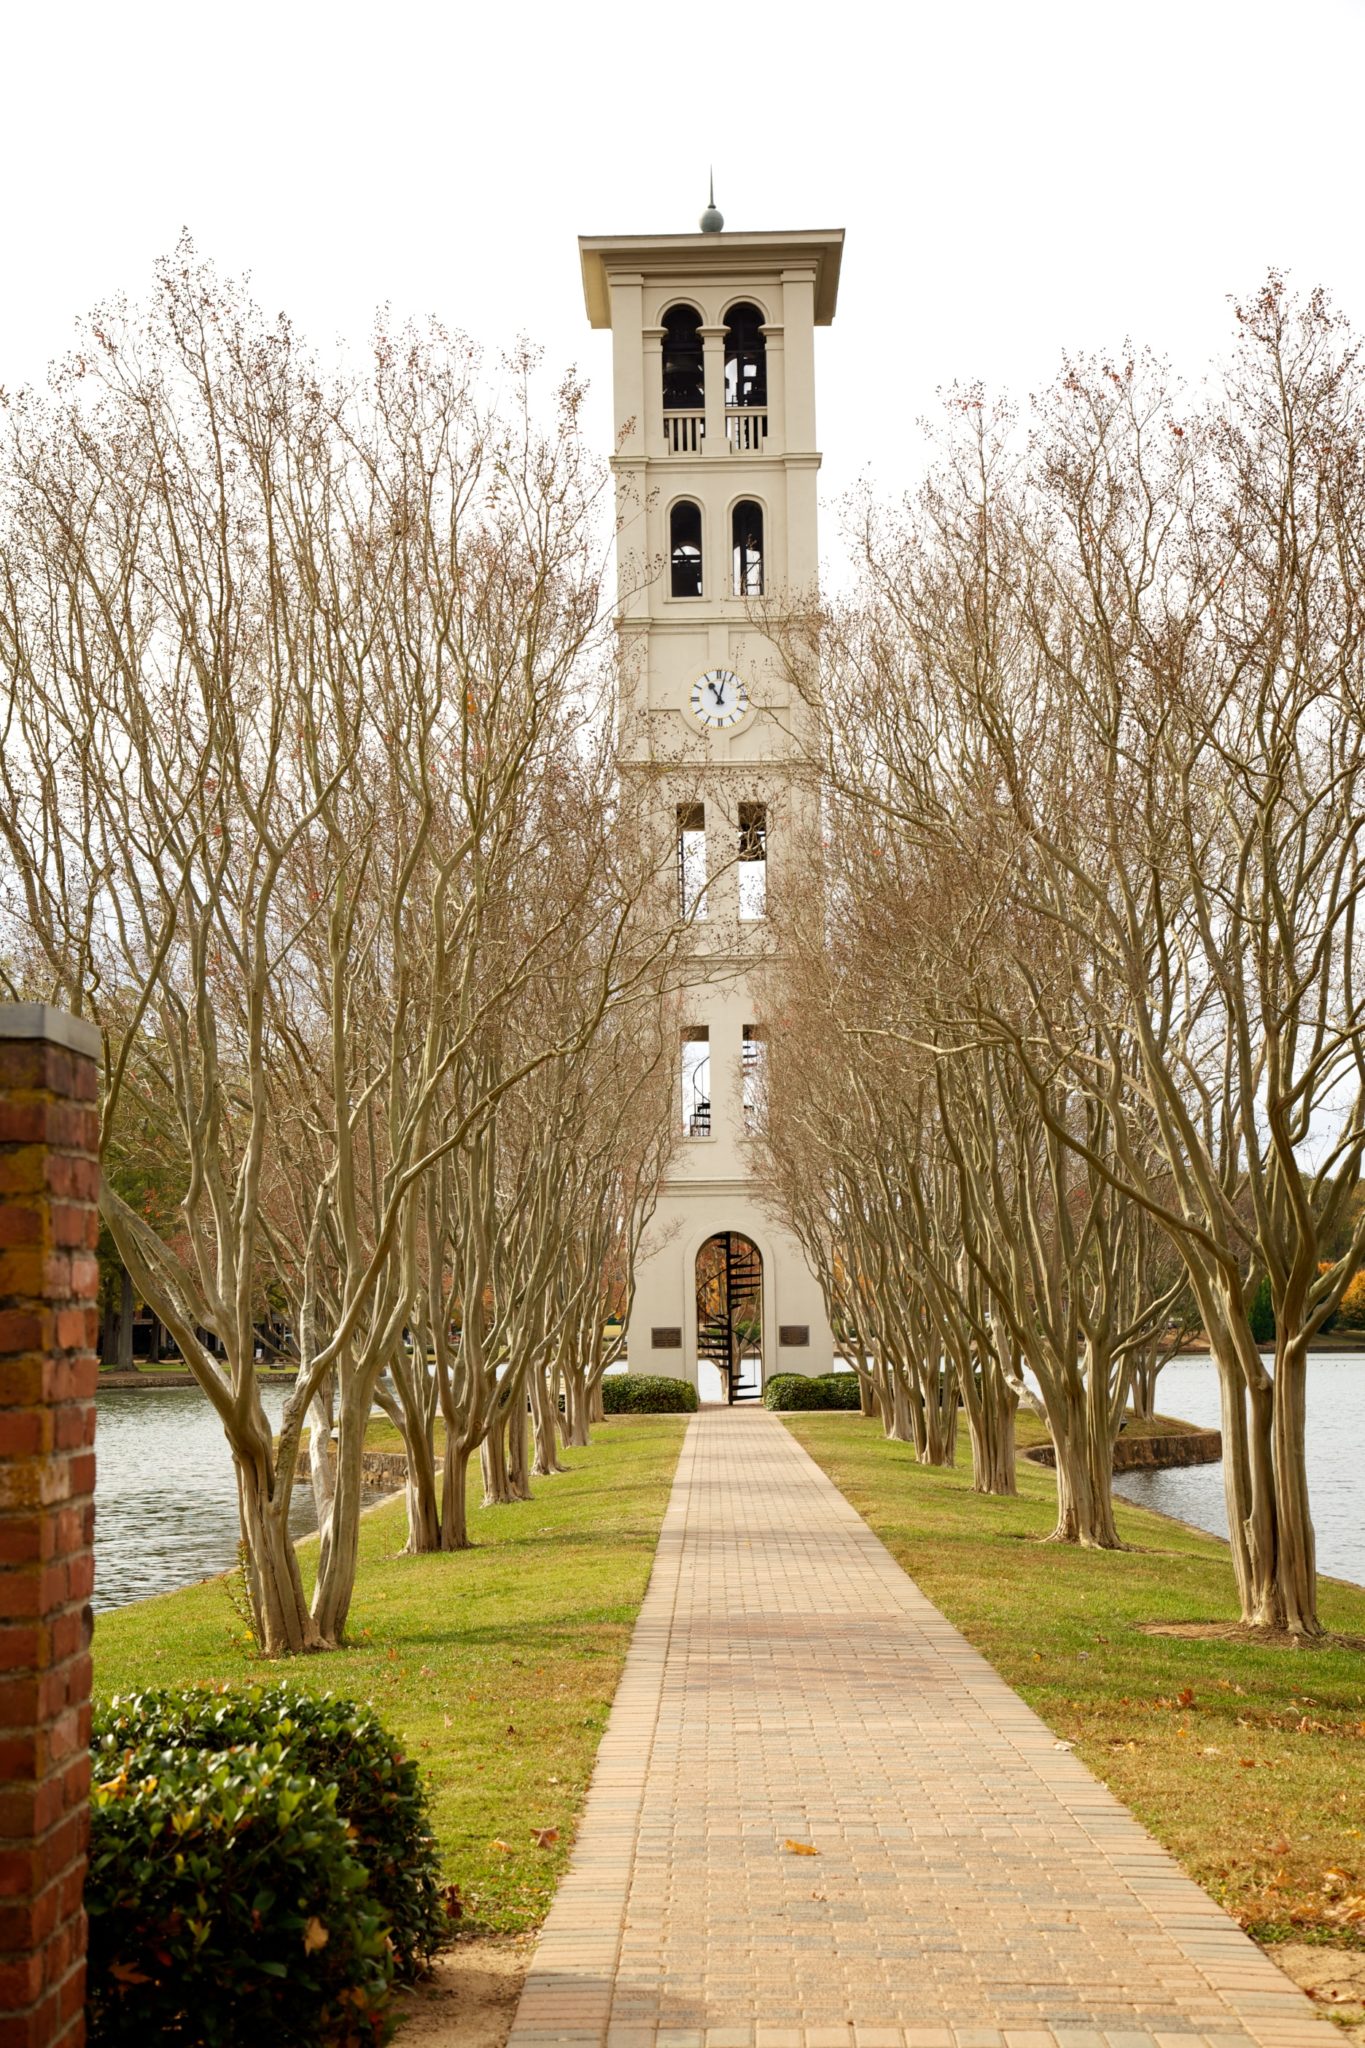 The Bell Tower is a landmark at Furman, the original tower was built in 1854